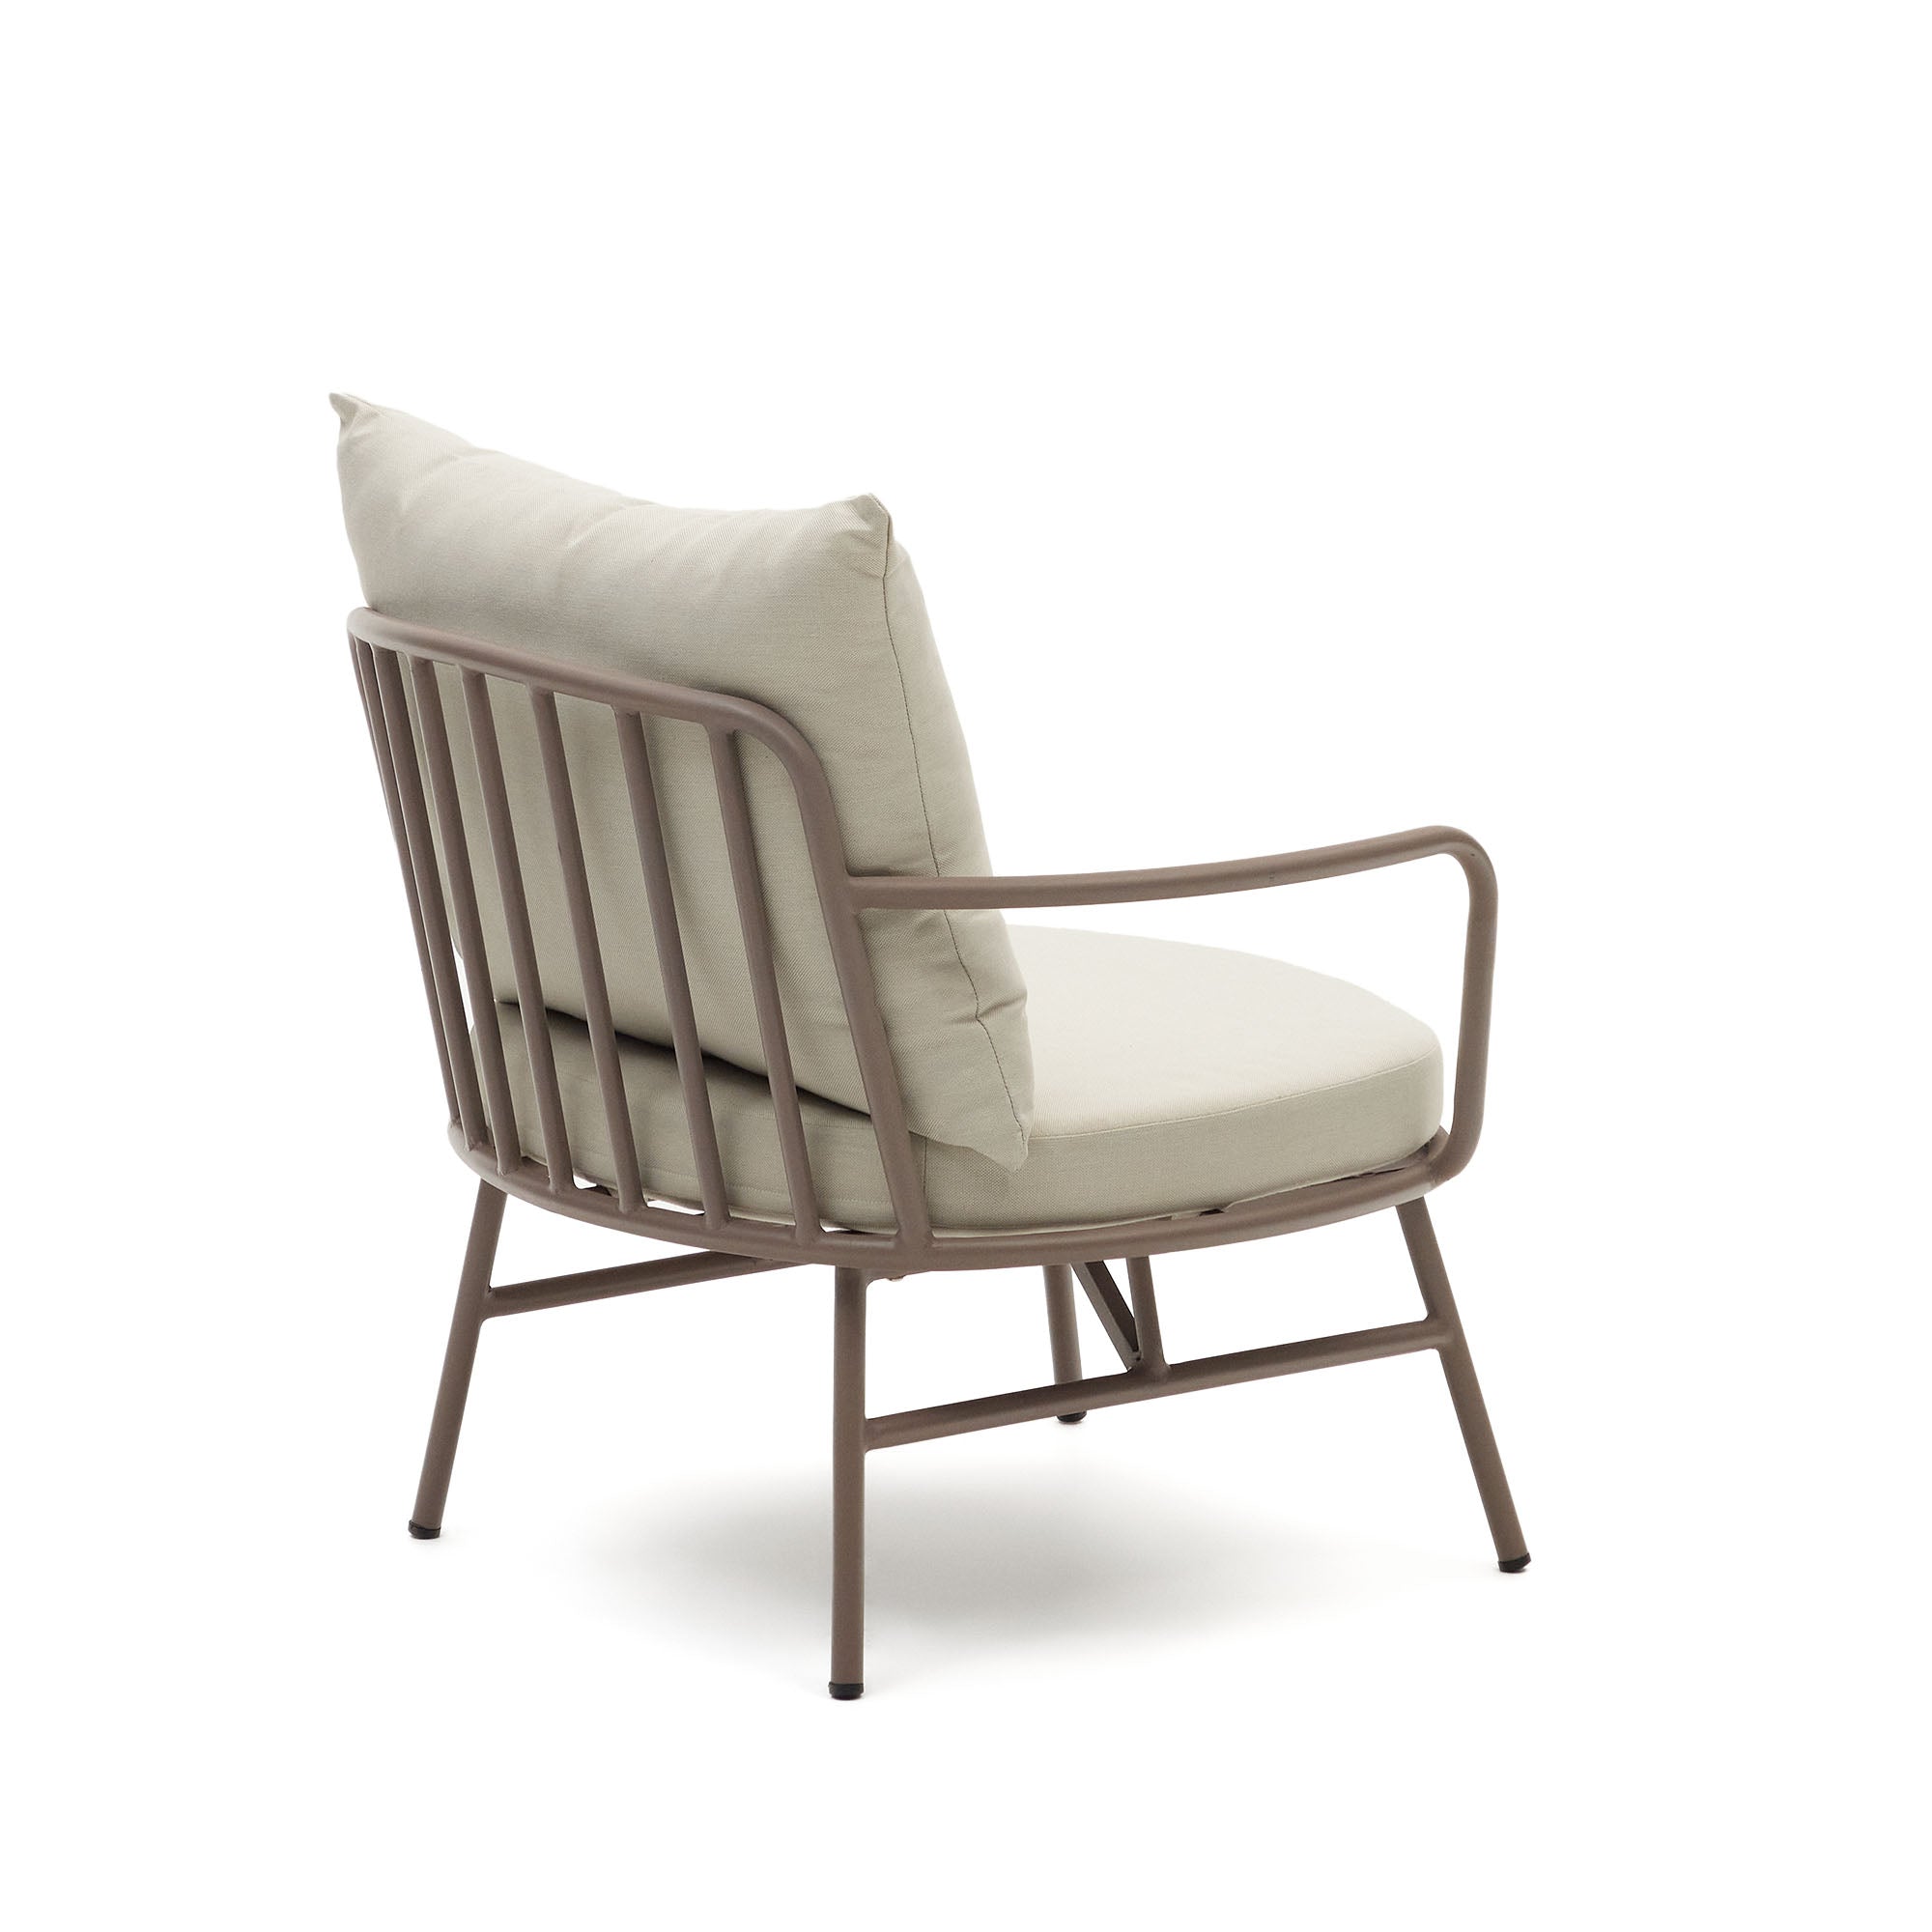 Bramant steel armchair with mauve finish